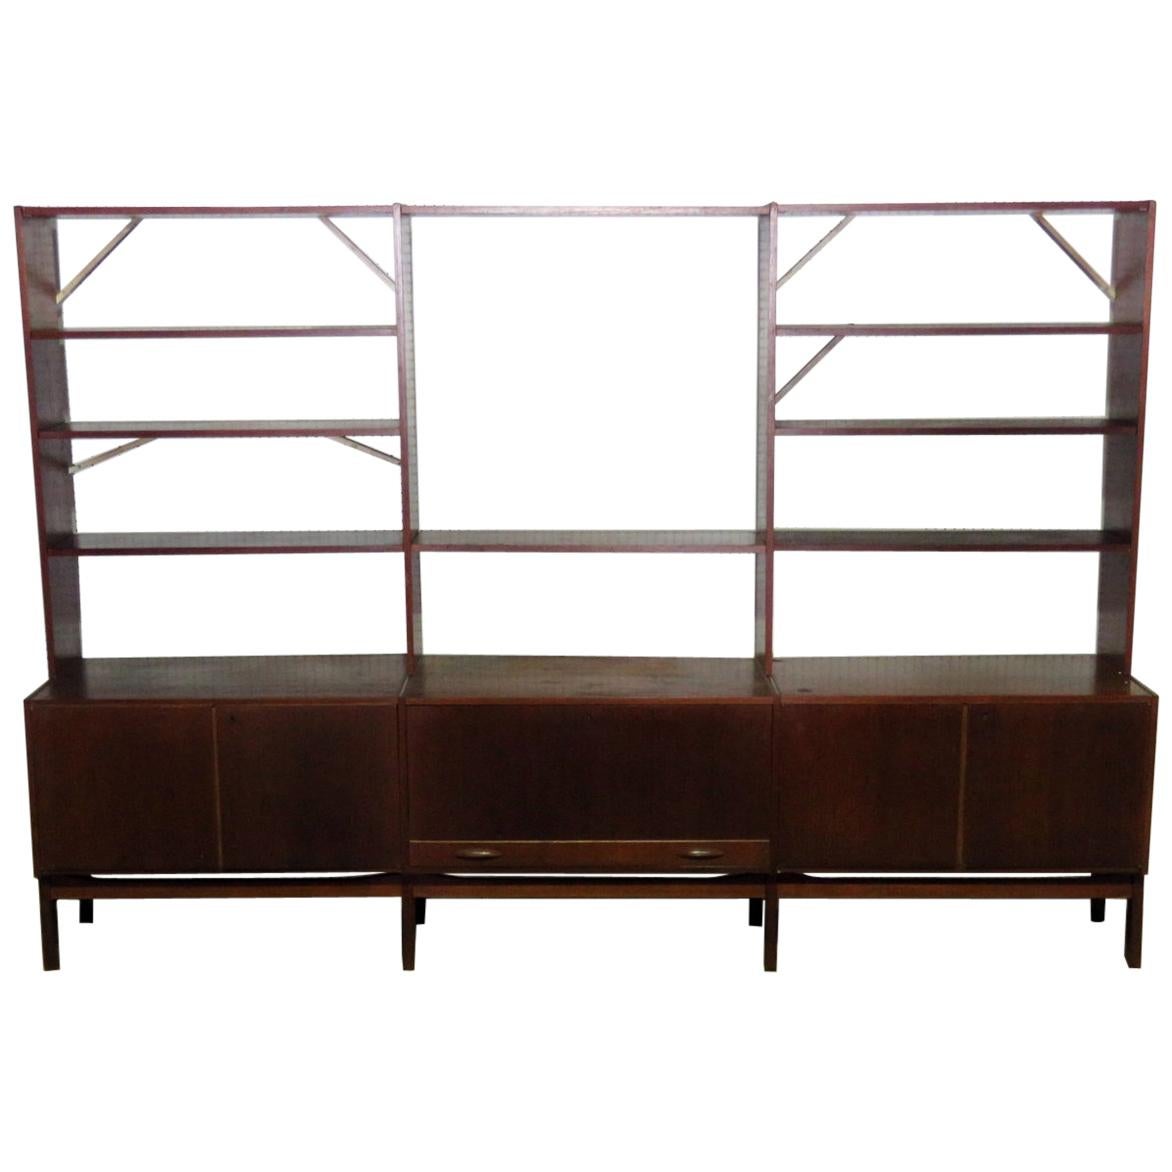 Mid-Century Modern Wall Unit, manner of Nils Thorsson